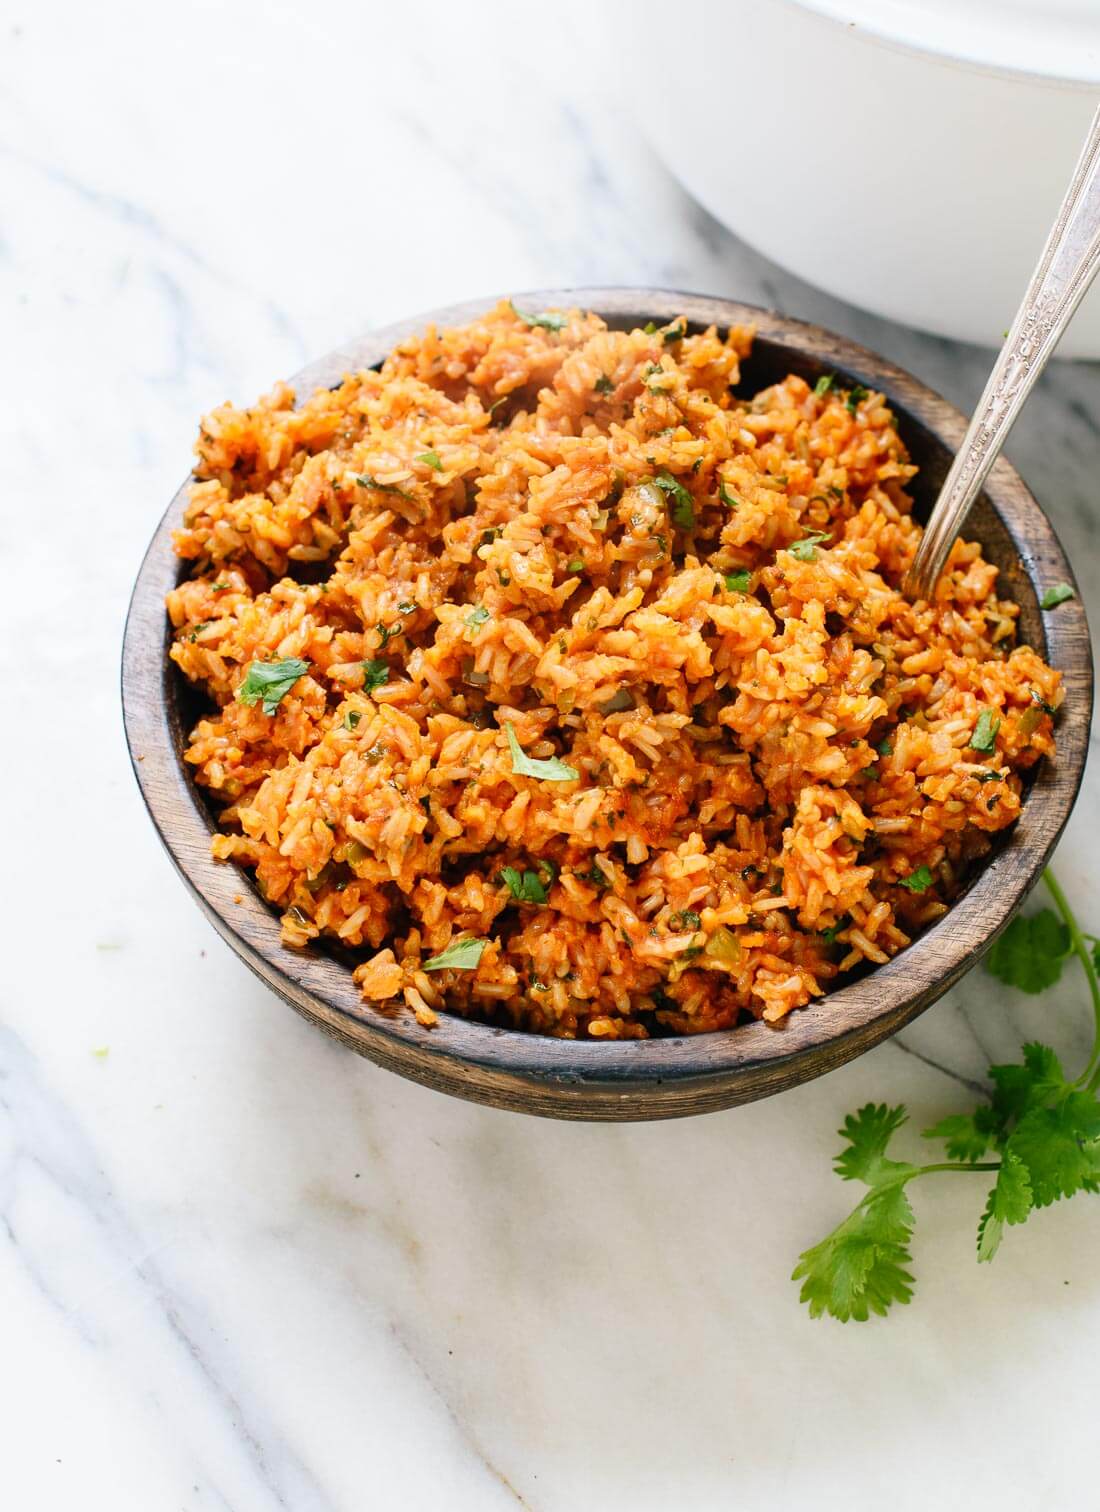 Amazing Mexican brown rice - tastes just like your favorite Mexican restaurant's rice, but made healthier! cookieandkate.com